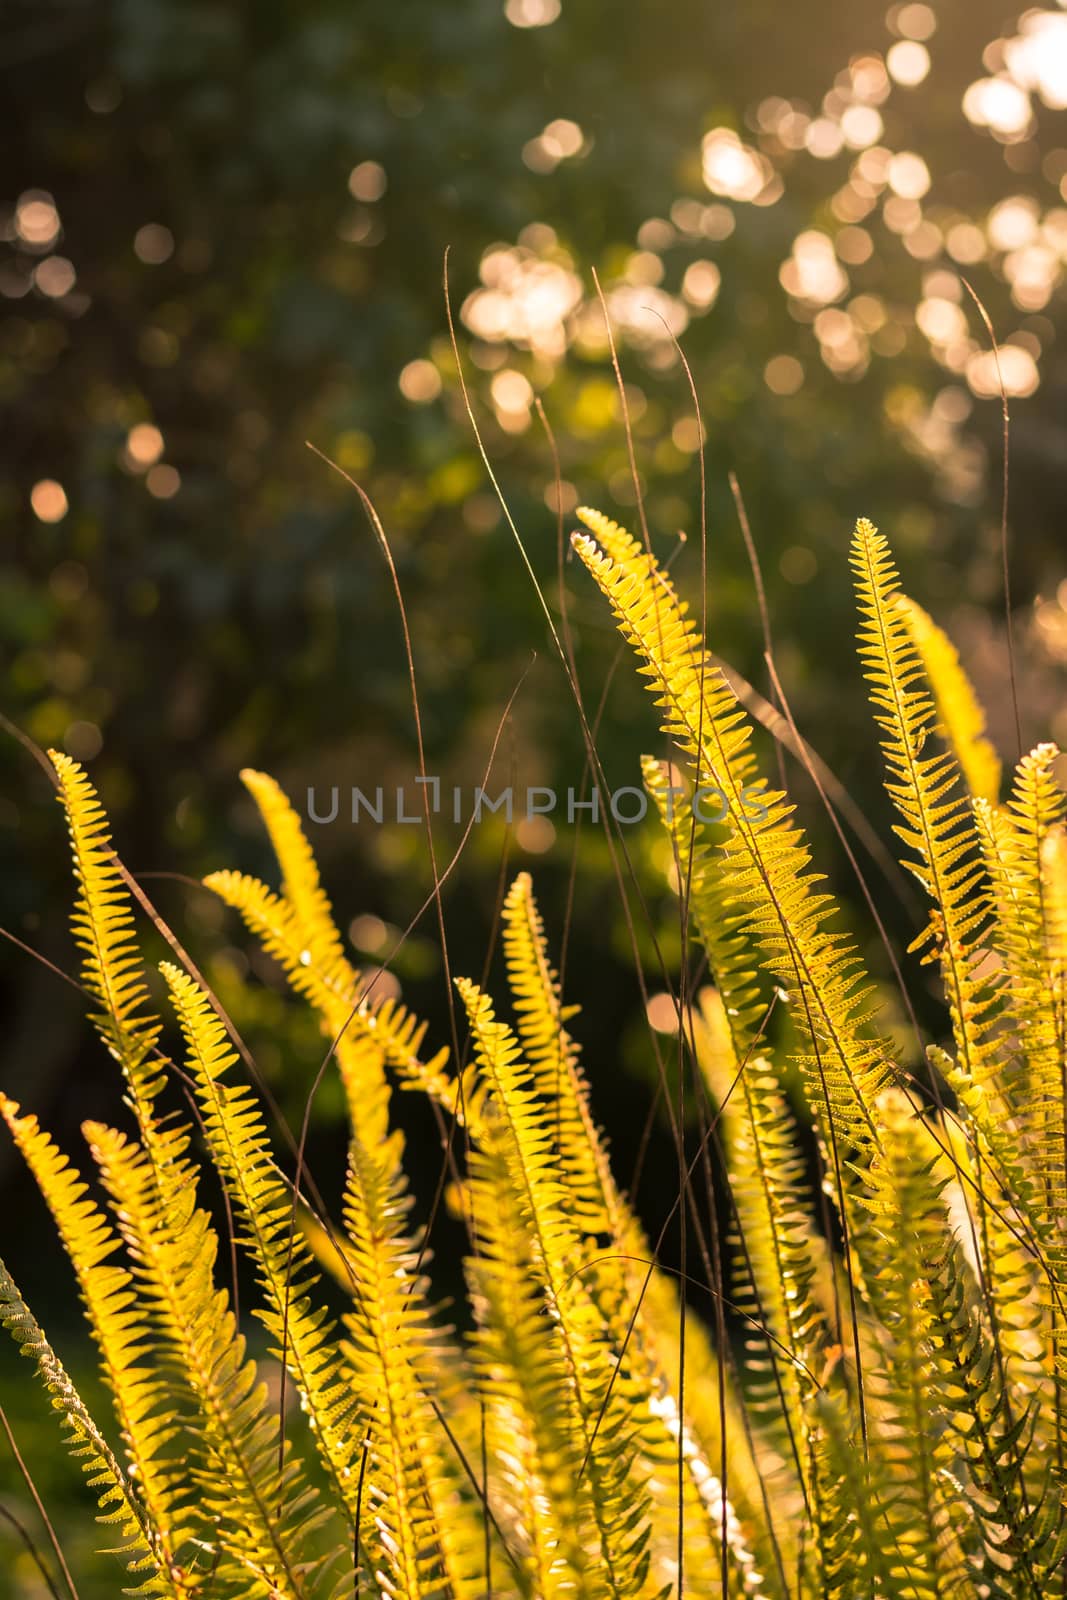 Fern leaf at sunset in a sunny day